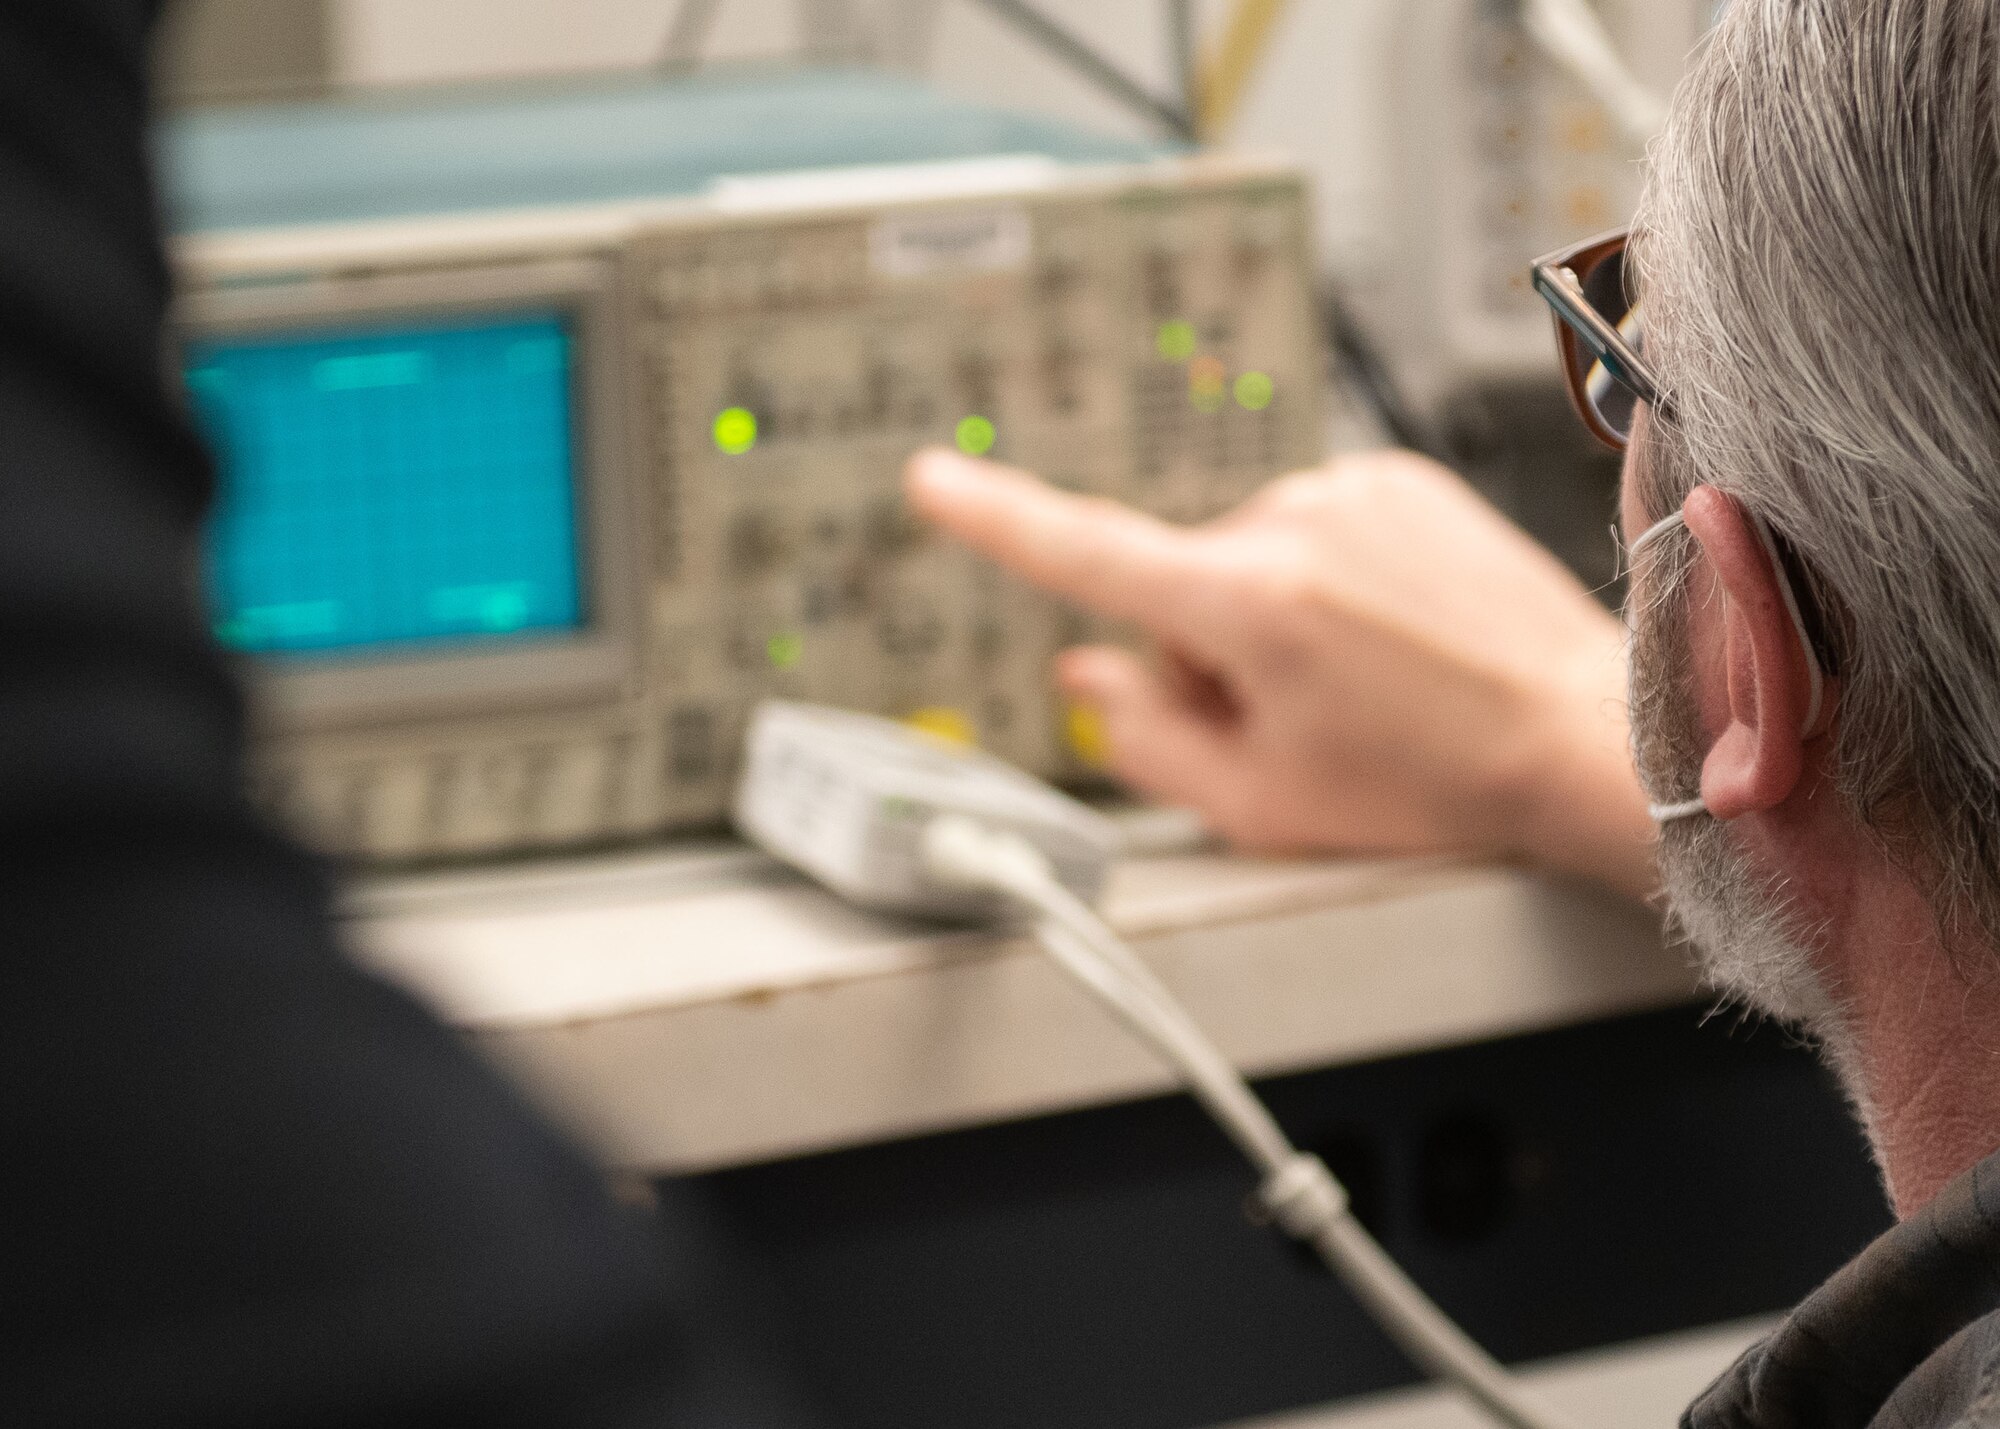 A PMEL technician points to a piece of calibration equipment